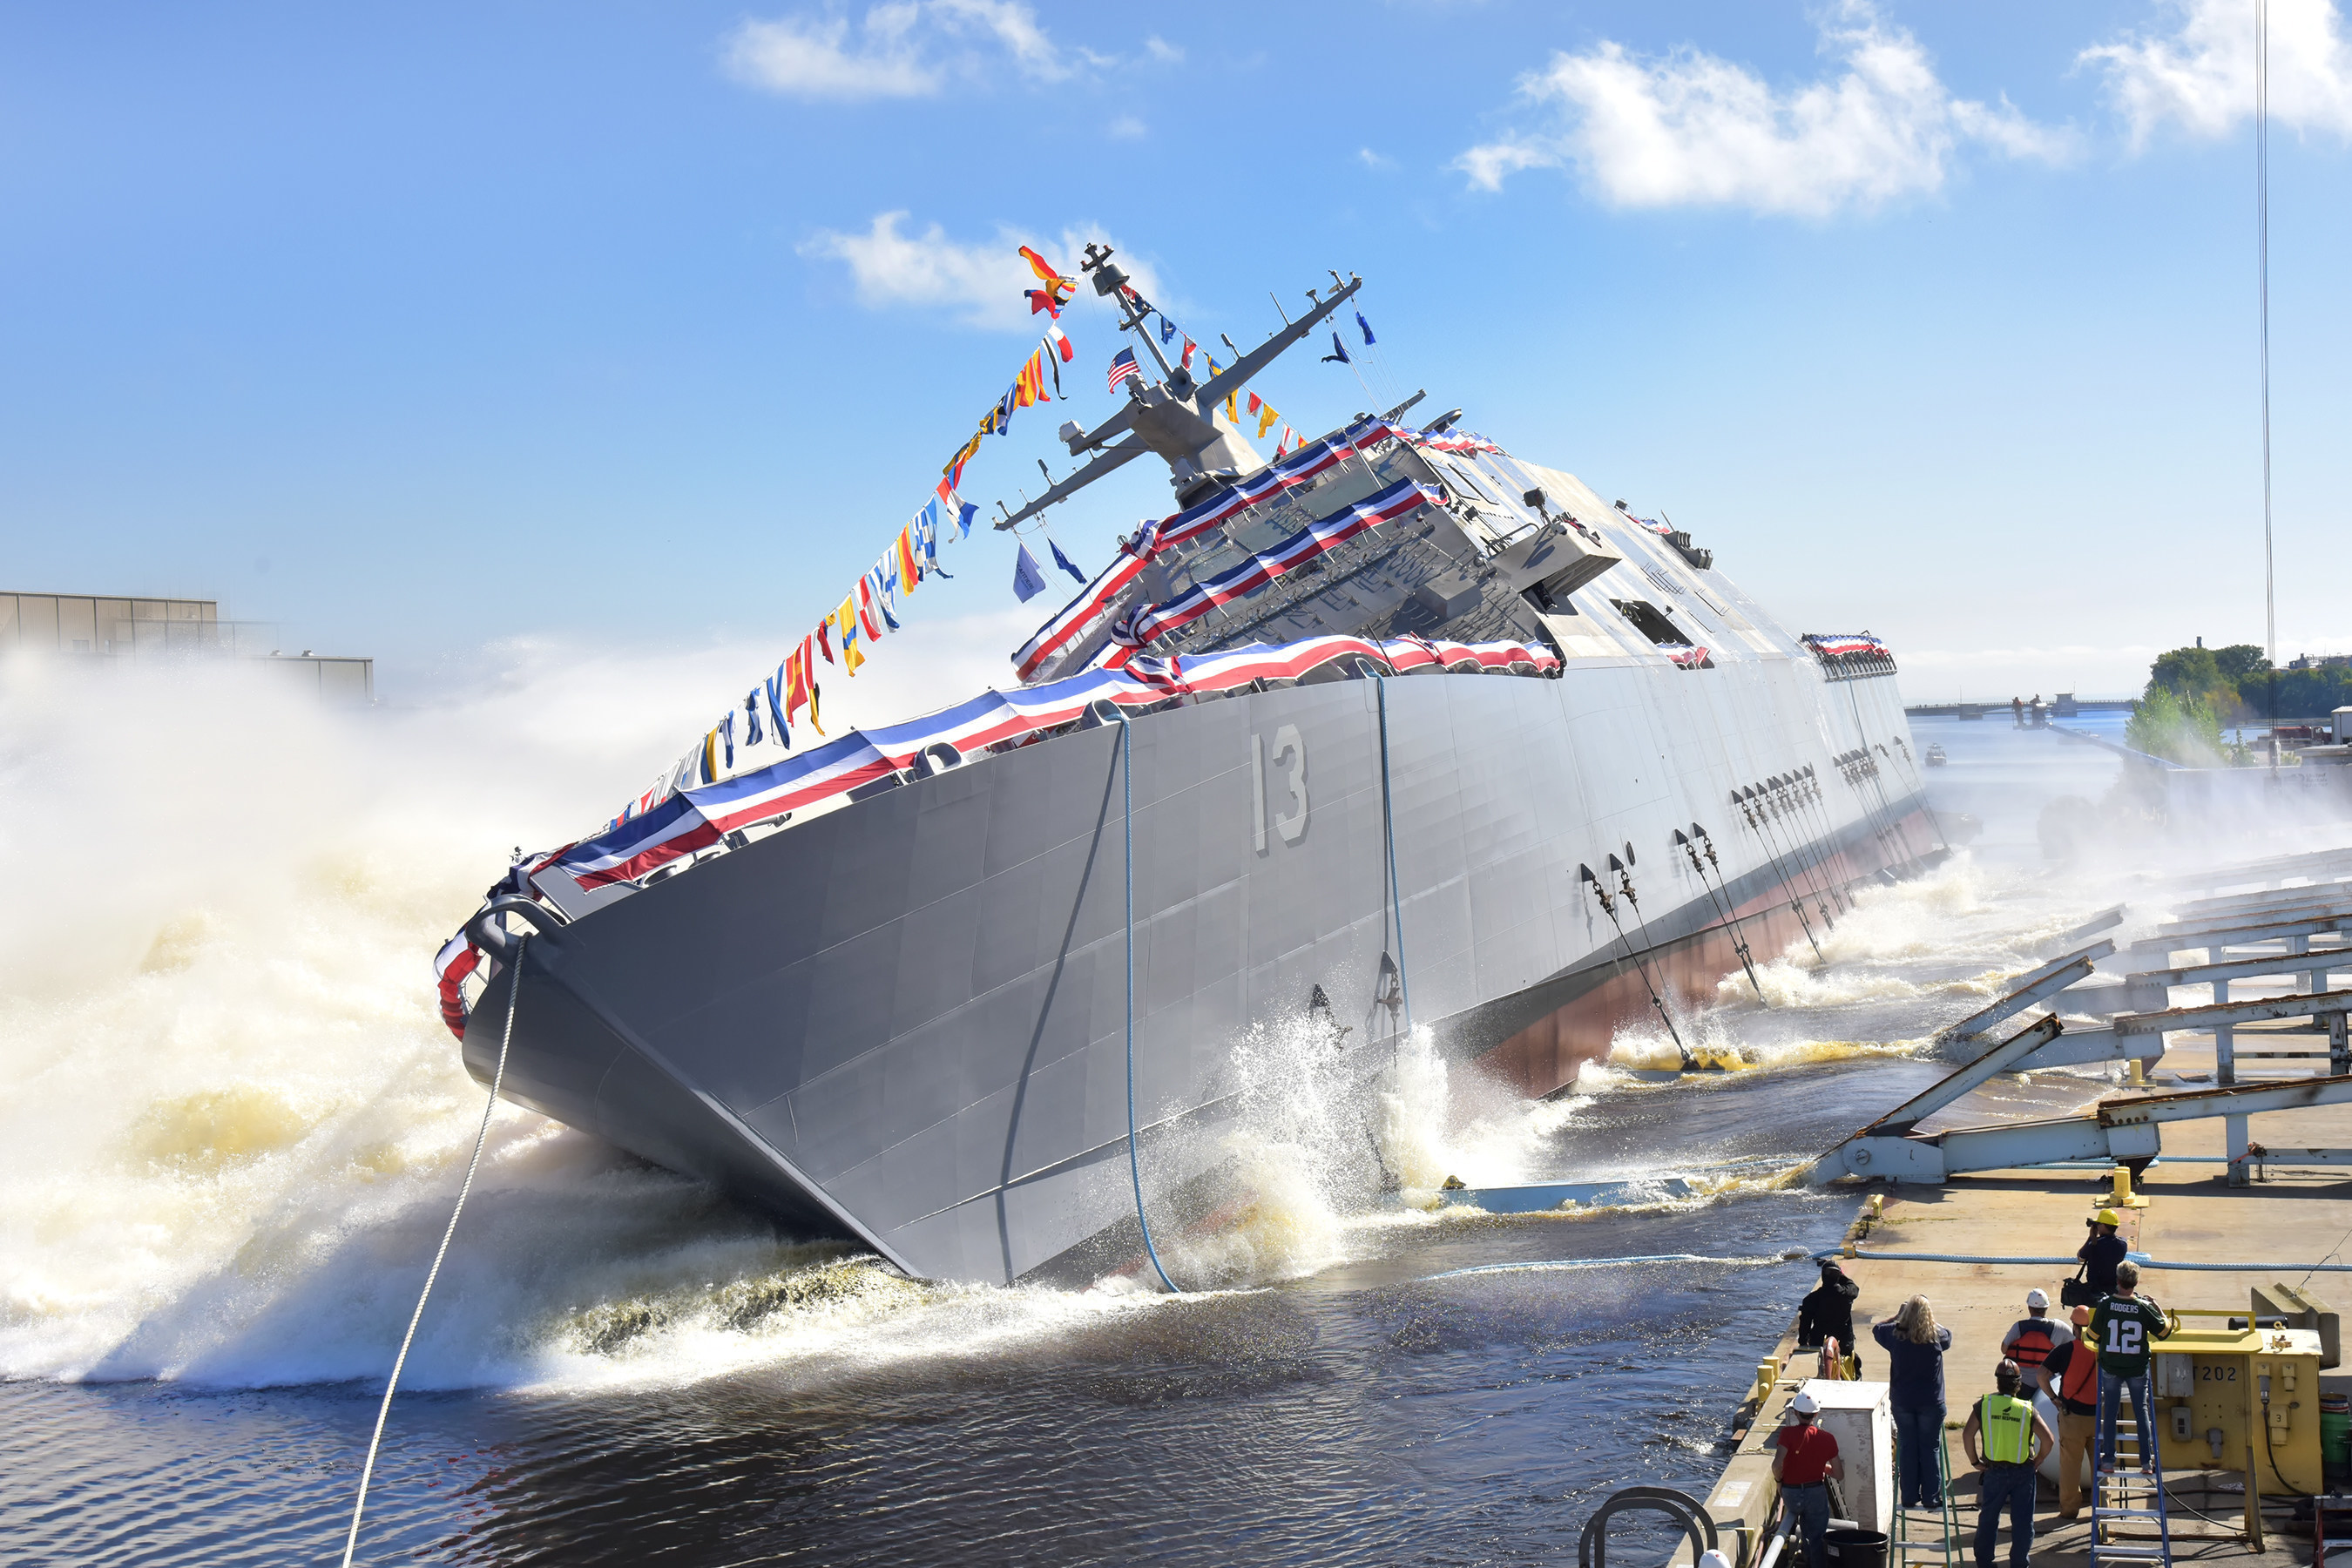 The 13th Littoral Combat Ship, the future USS Wichita launches sideways into the Menominee River in Marinette, Wisconsin, on Sept. 17. Once commissioned, LCS 13 will be the third ship to carry the name of Wichita, Kansas.